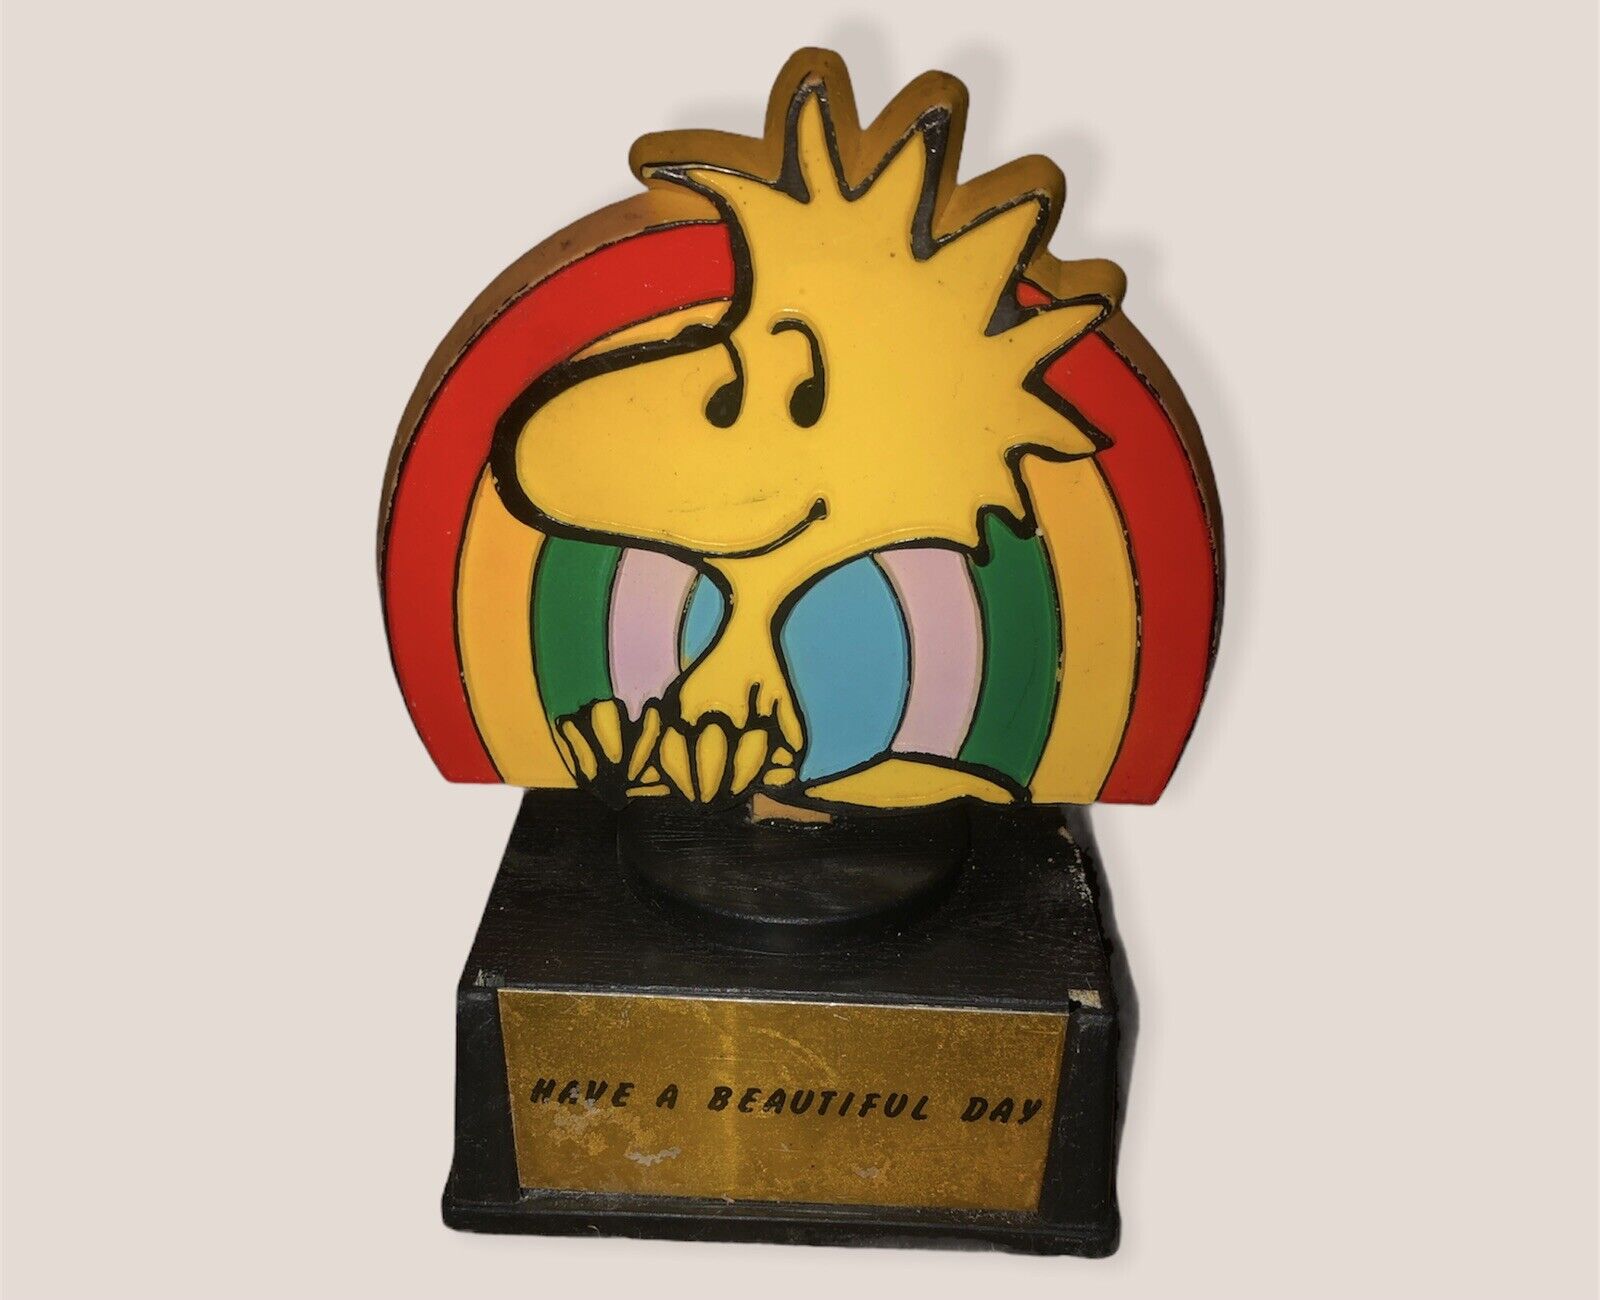 Peanuts Woodstock & Rainbow “Have A Beautiful Day” Vintage Trophy By Aviva